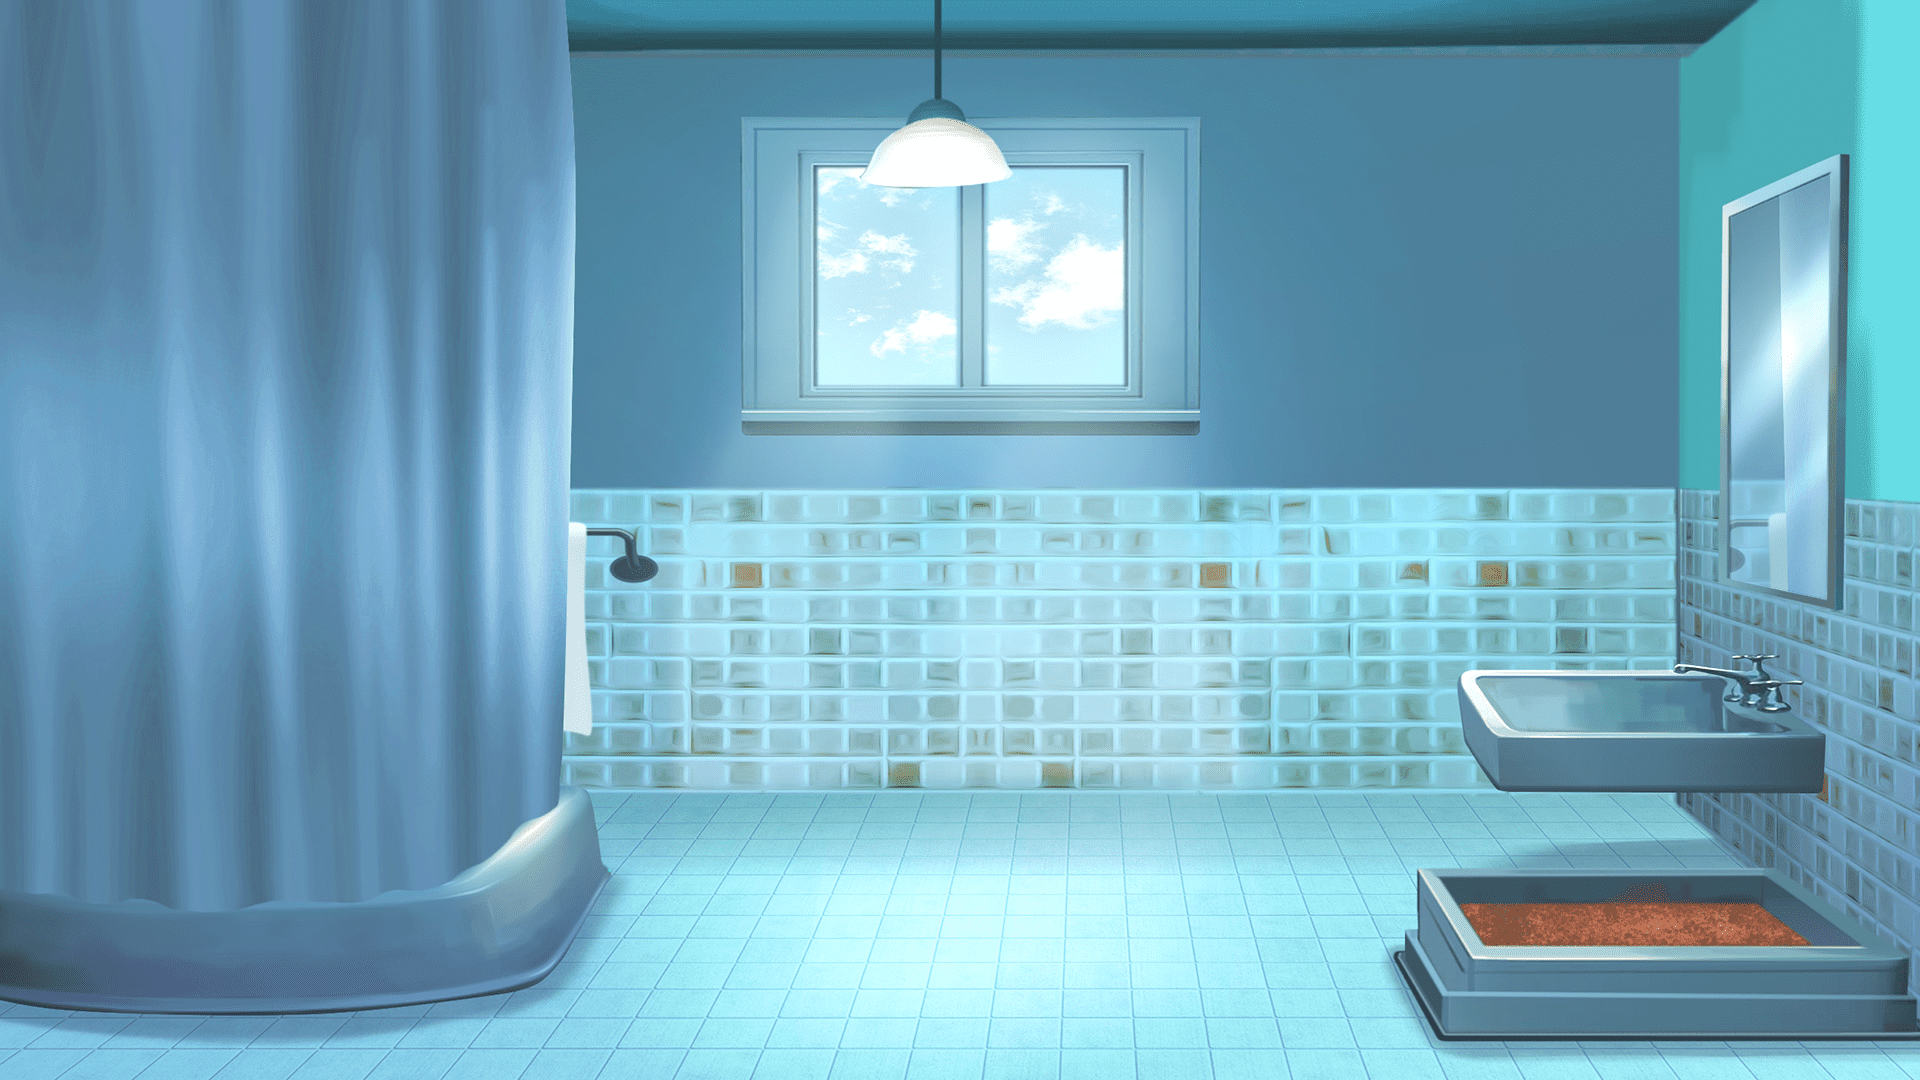 109 Anime Shower Photos Pictures And Background Images For Free Download   Pngtree